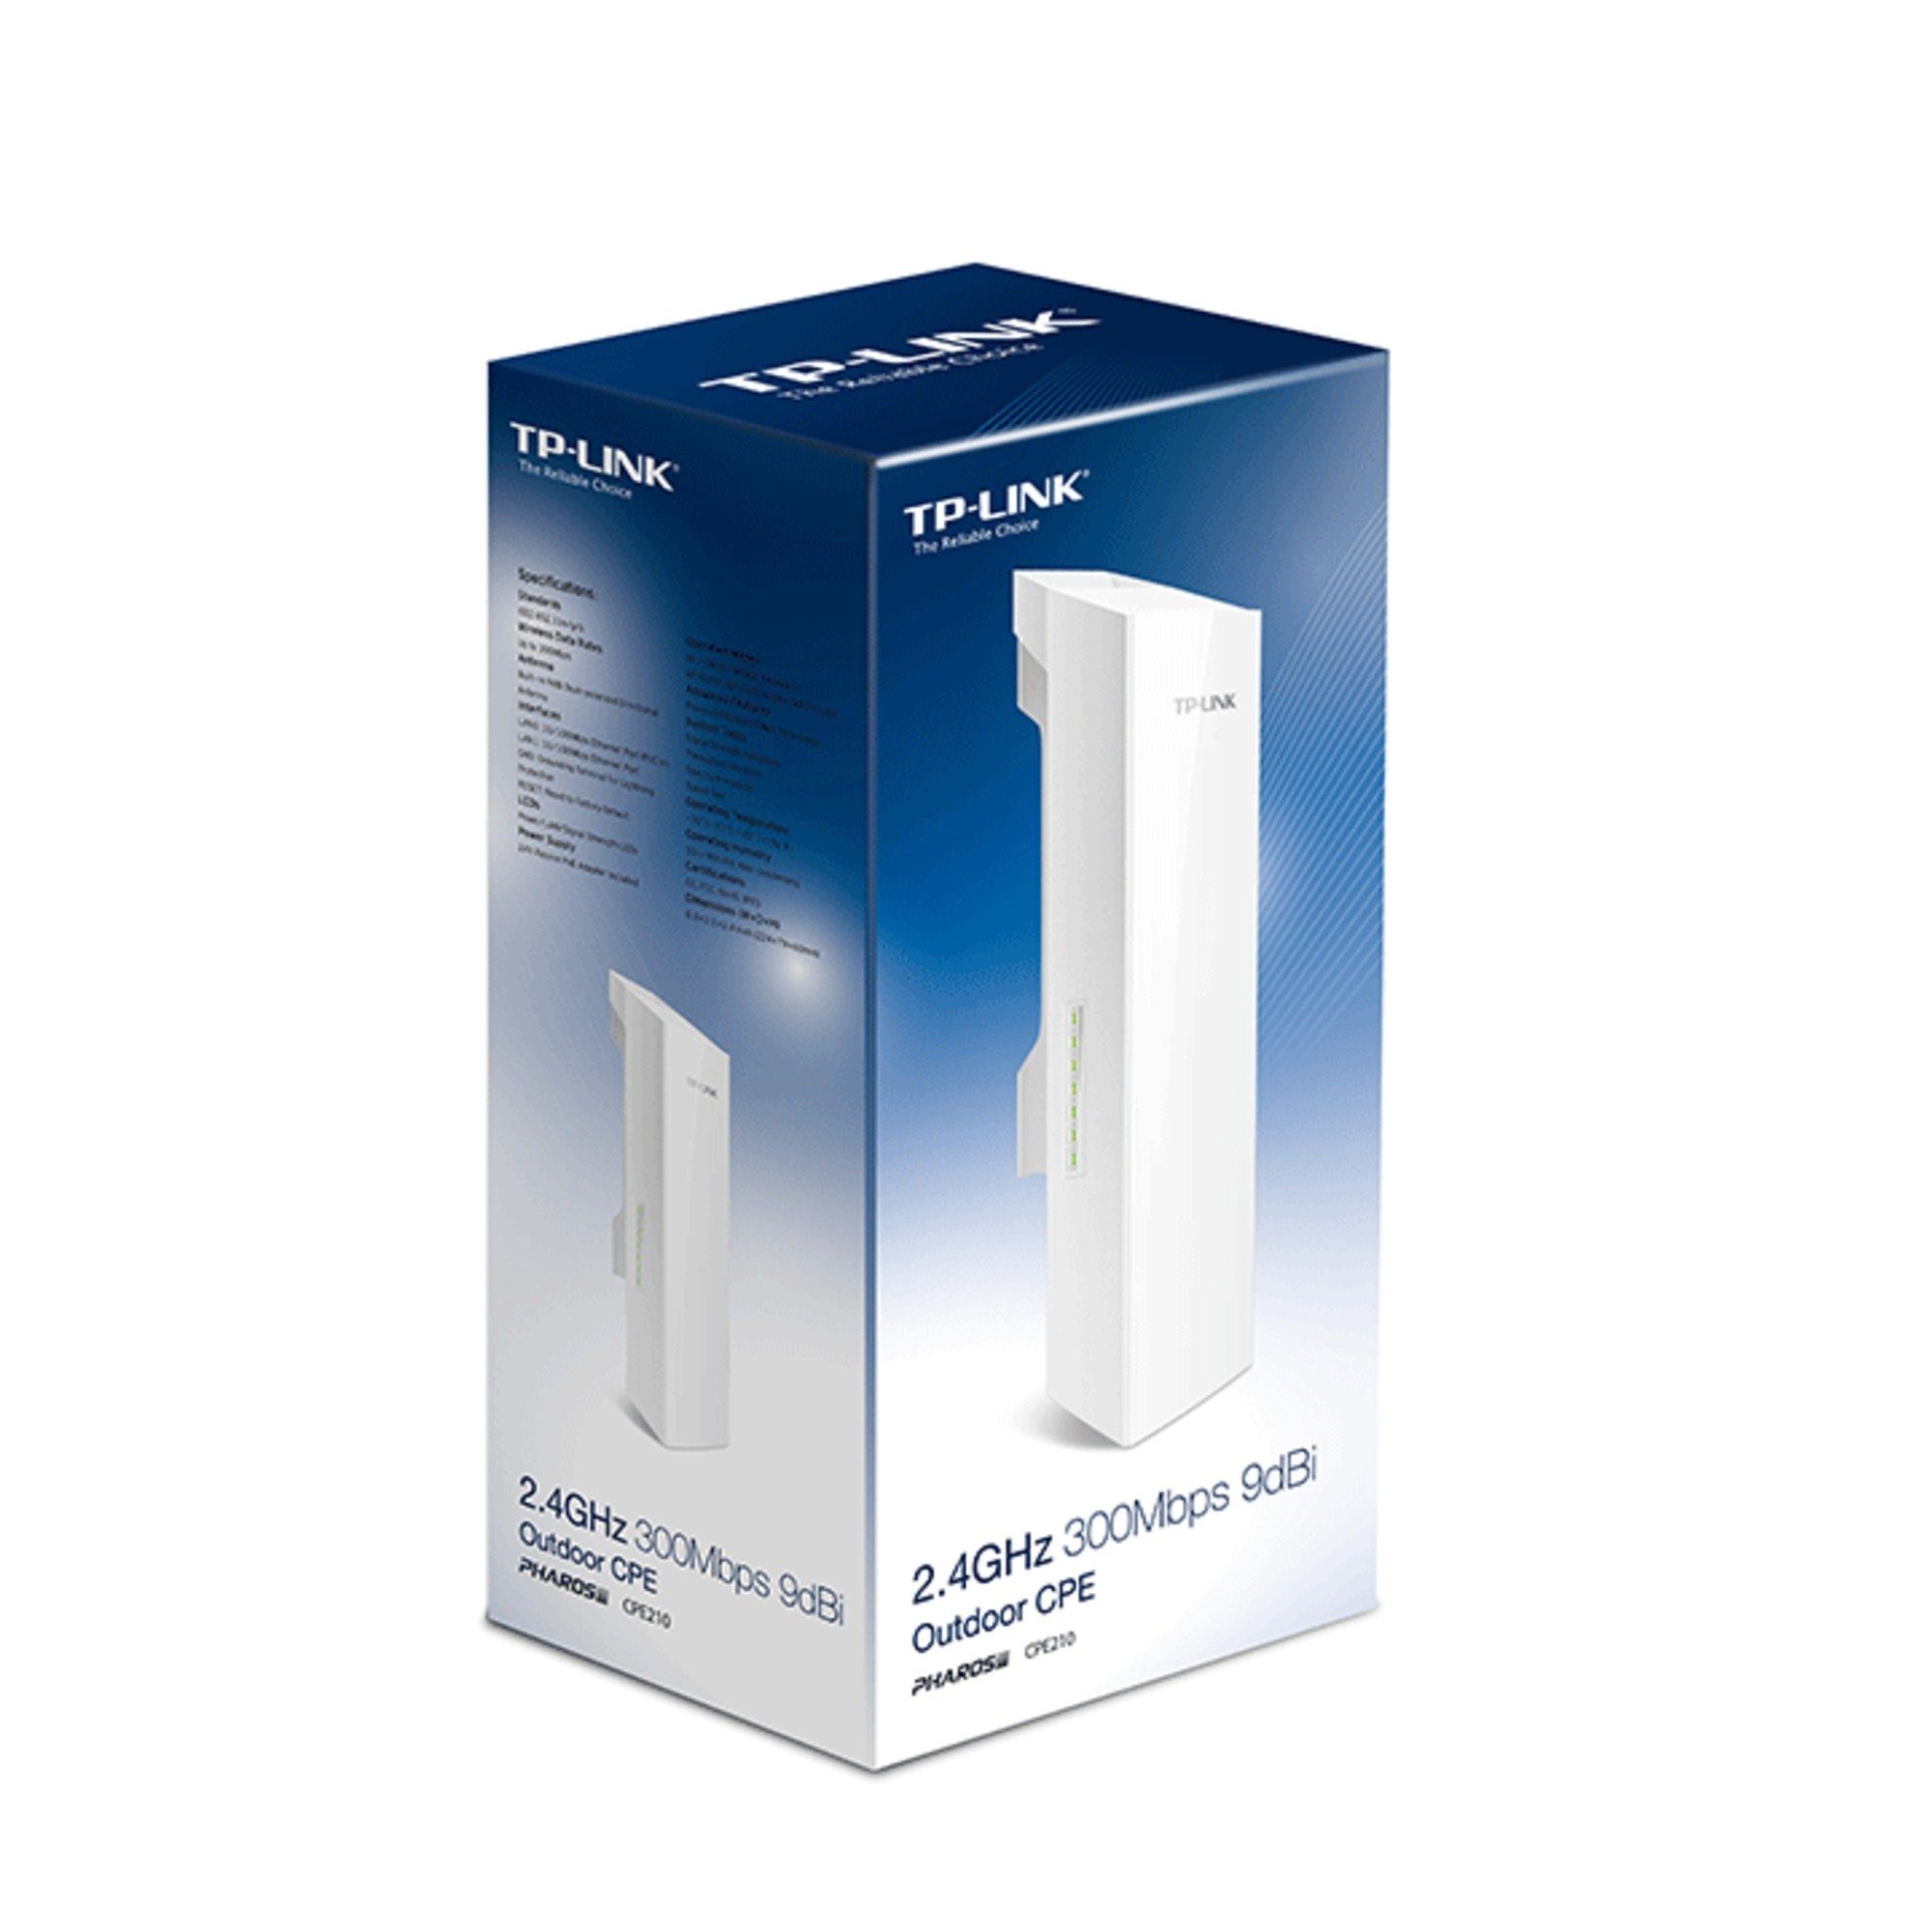 WLAN-Repeater Access TP-Link Pharos Point CPE210, TP-Link